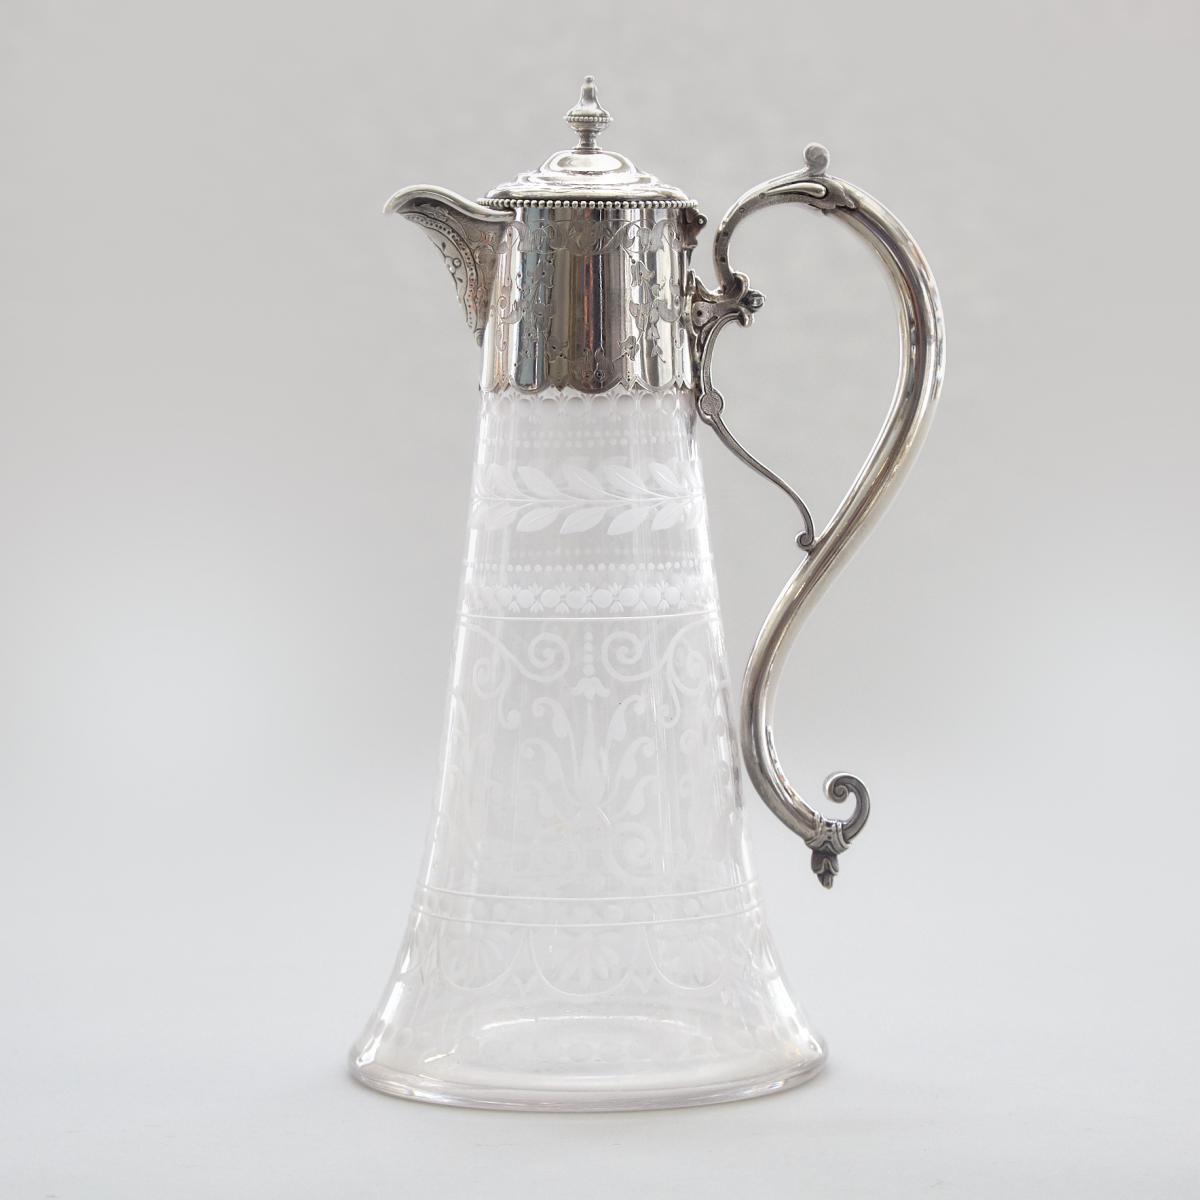 Victorian Silver Mounted Engraved Glass Claret Jug, George Richards & Edward Brown, London, 1868, he